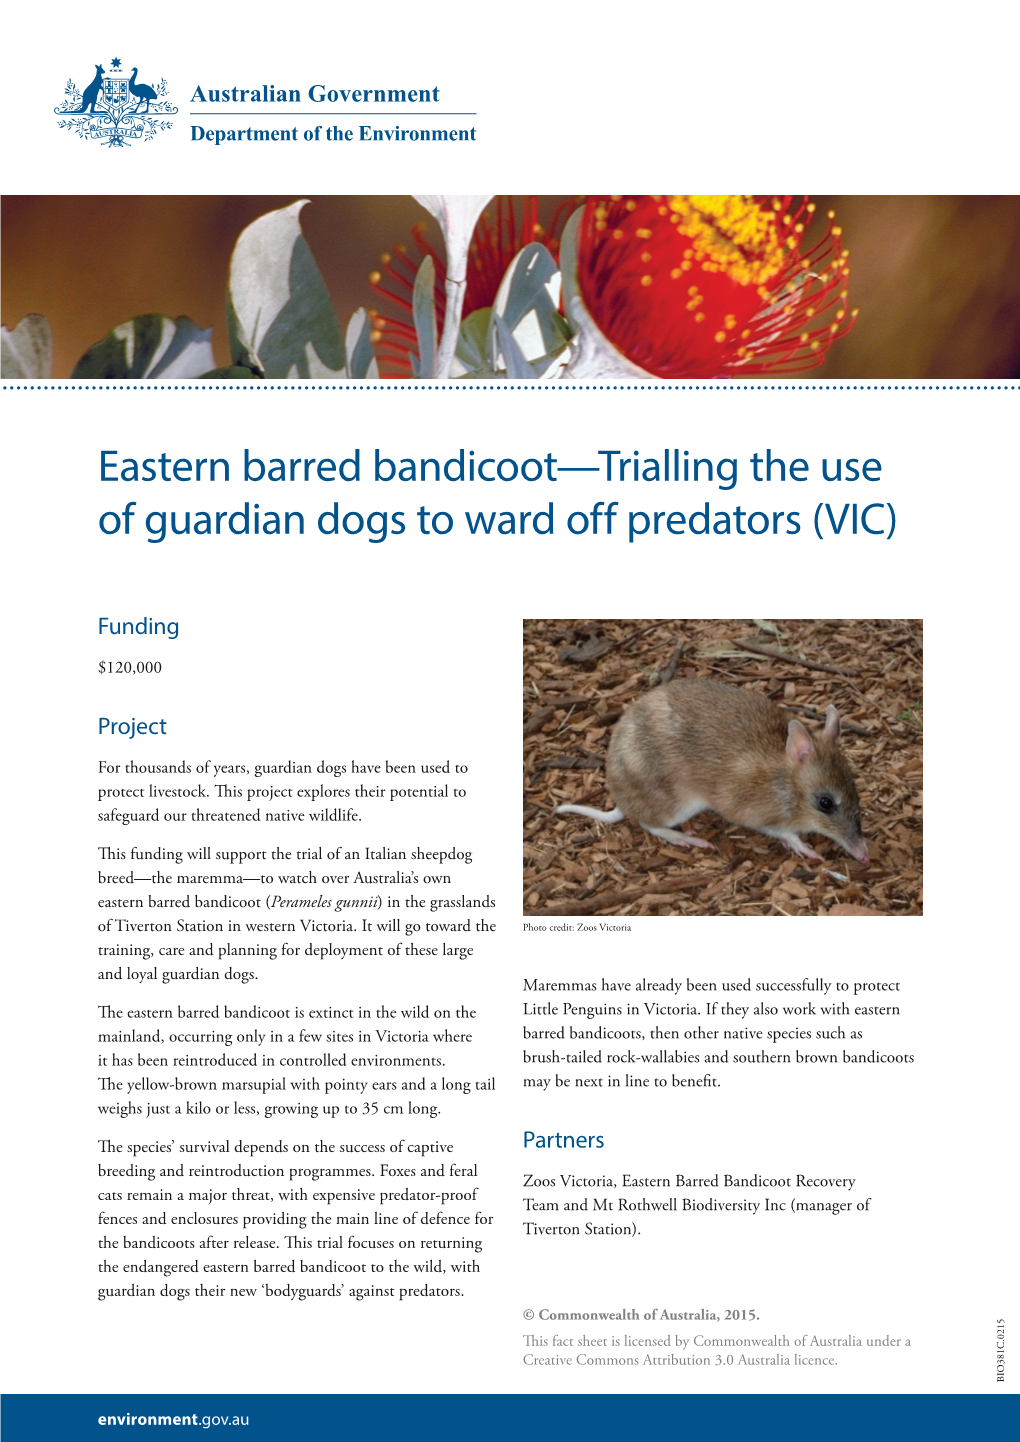 Eastern Barred Bandicoot—Trialling the Use of Guardian Dogs to Ward Off Predators (VIC)